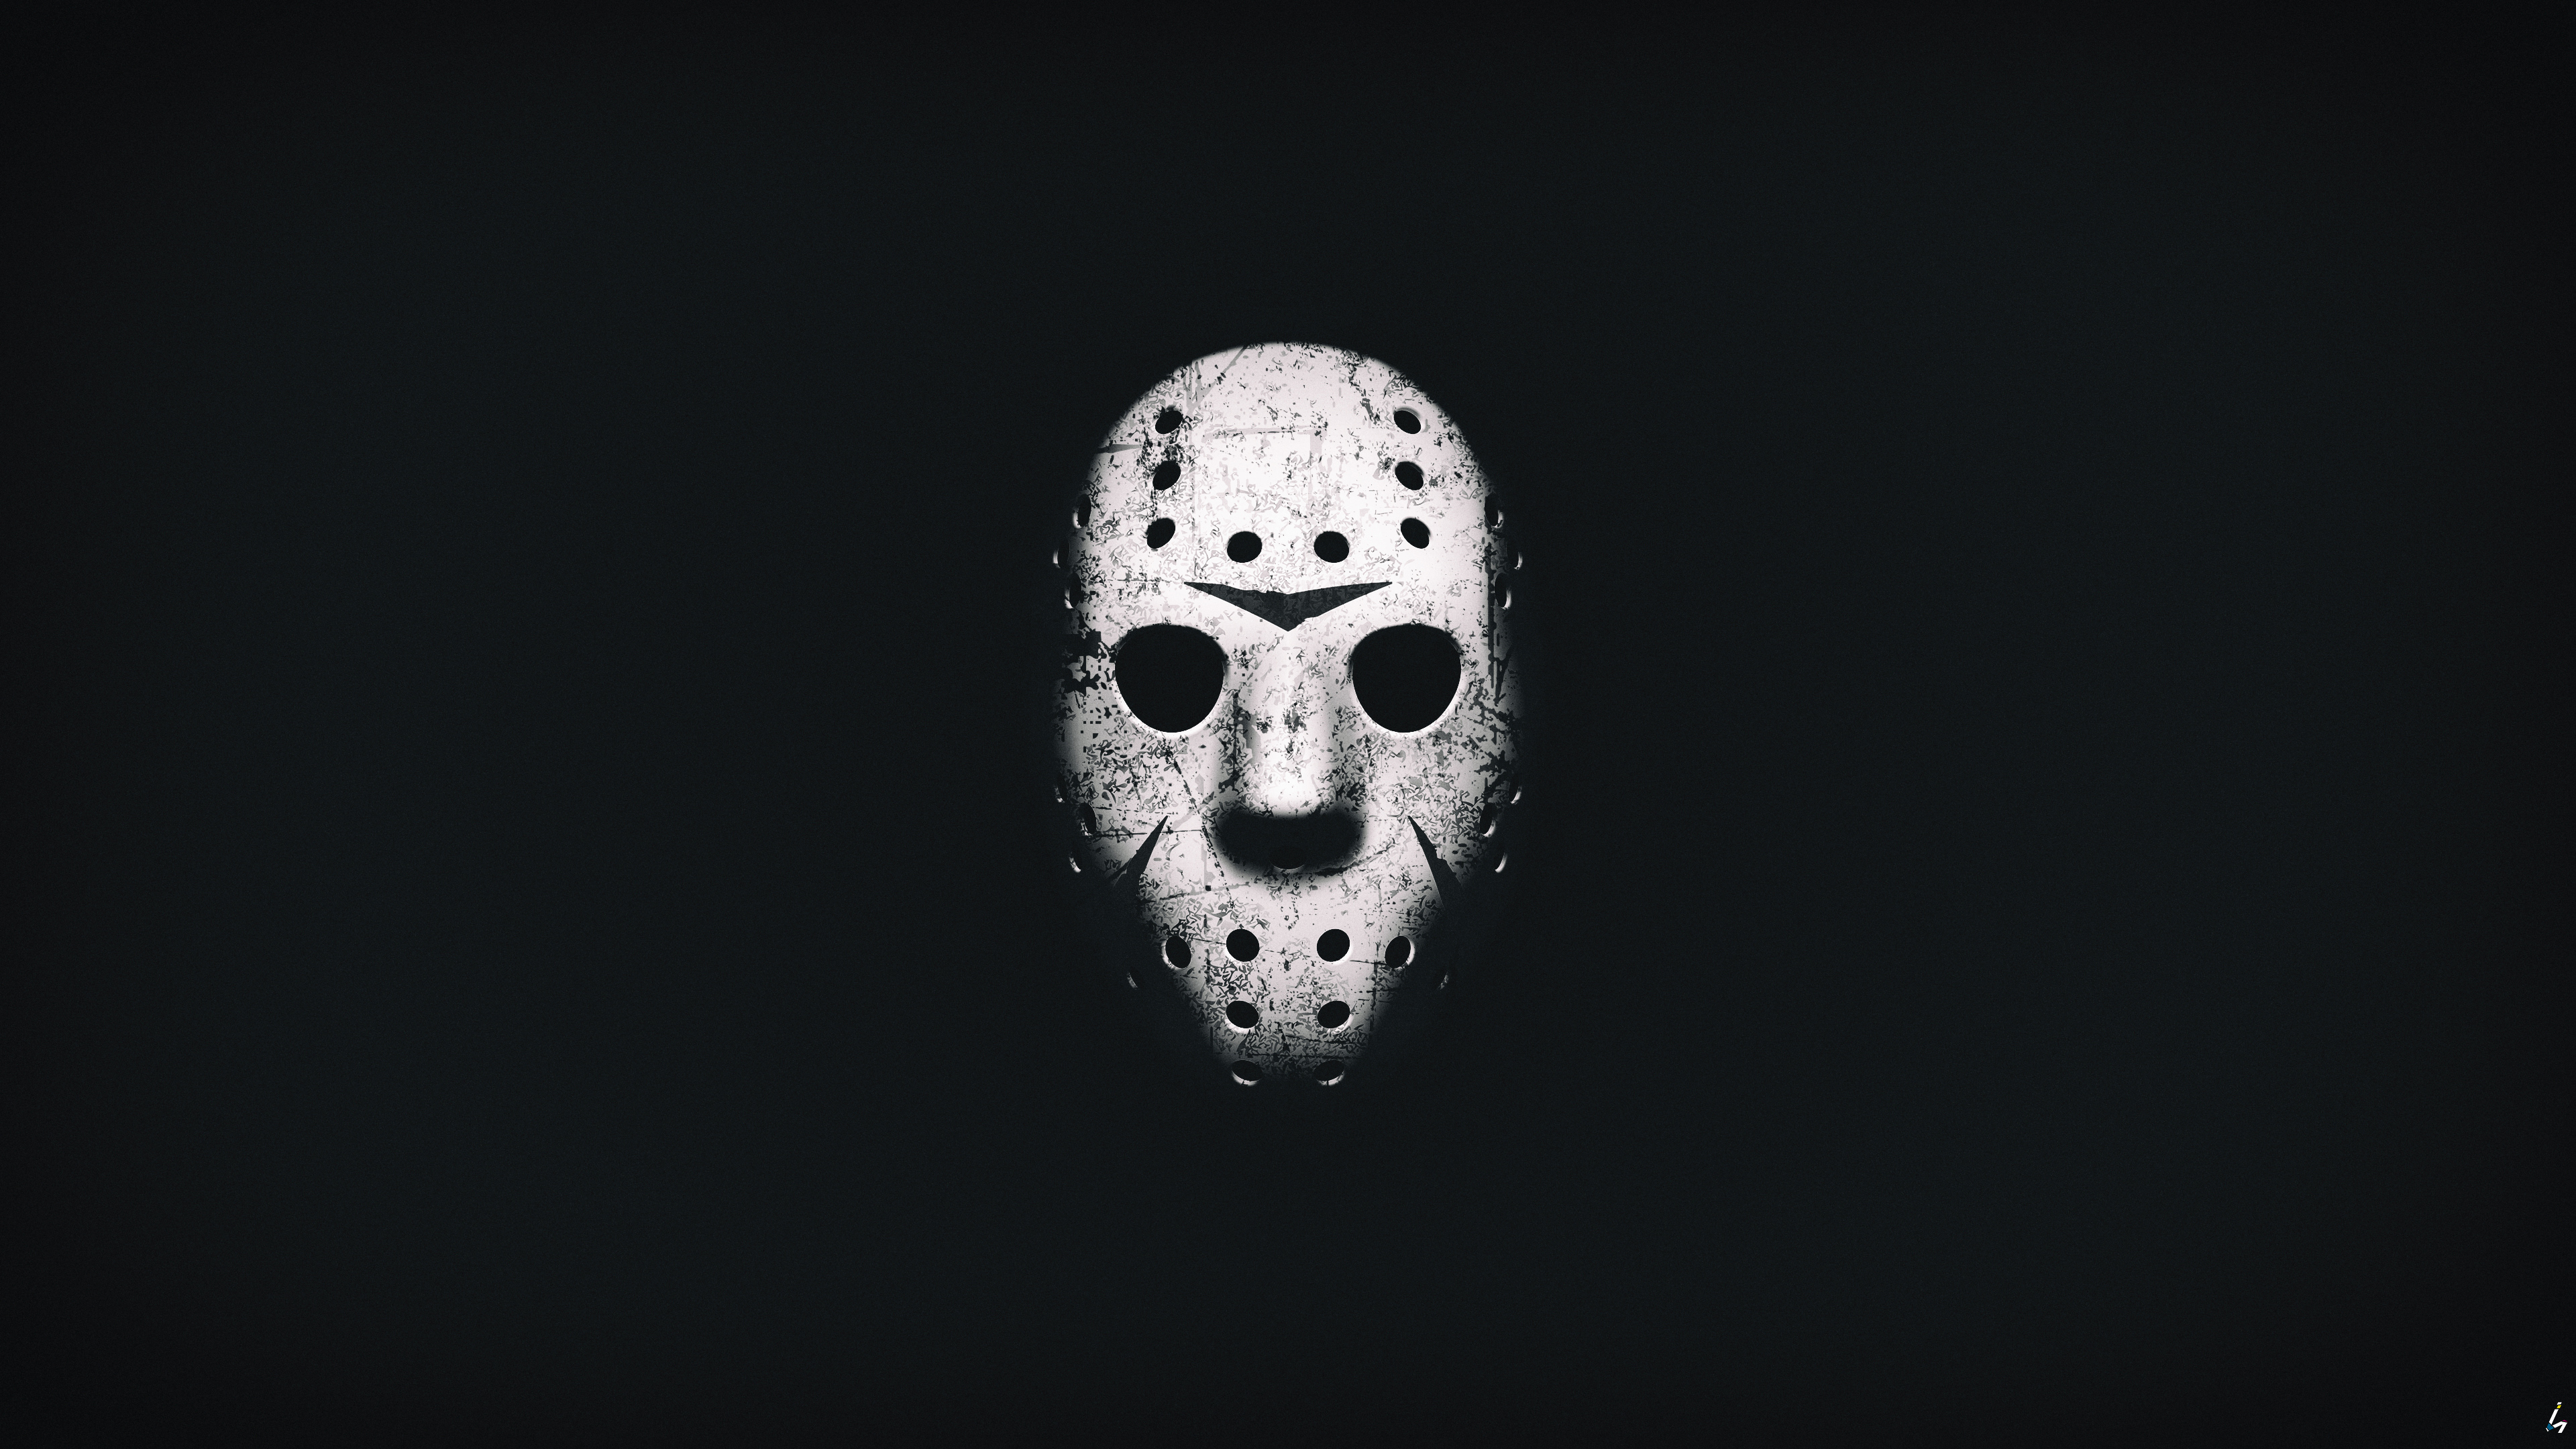 friday the 13th monochrome 4k 1554244072 - Friday The 13th Monochrome 4k - monochrome wallpapers, mask wallpapers, hd-wallpapers, friday the 13th the games wallpapers, black and white wallpapers, 4k-wallpapers